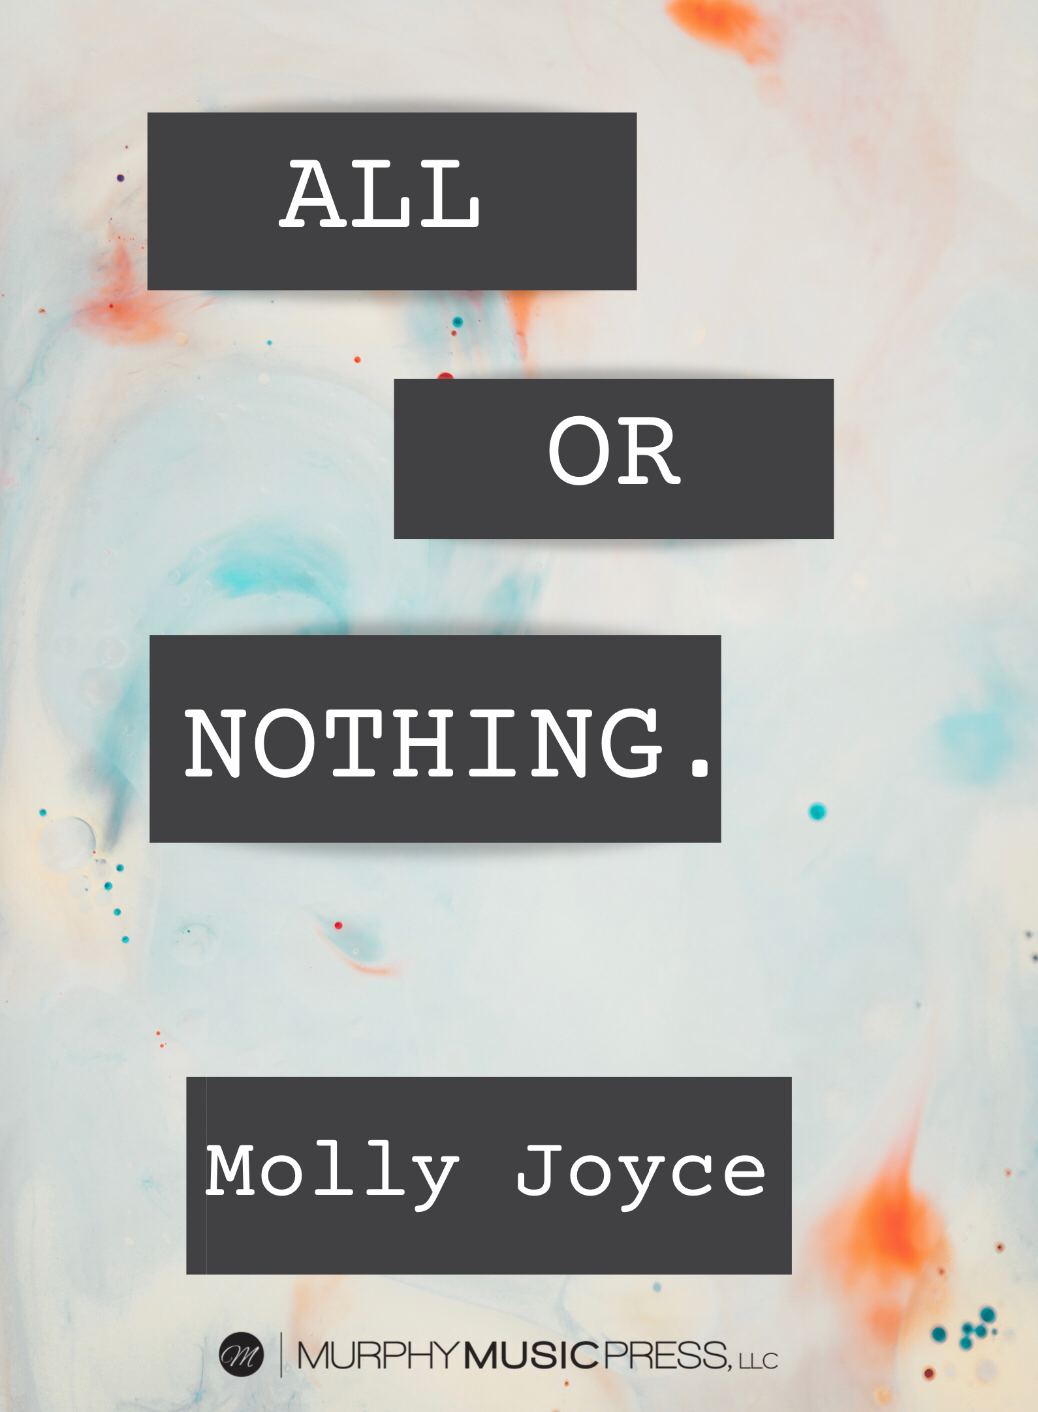 All Or Nothing  Murphy Music Press, LLC